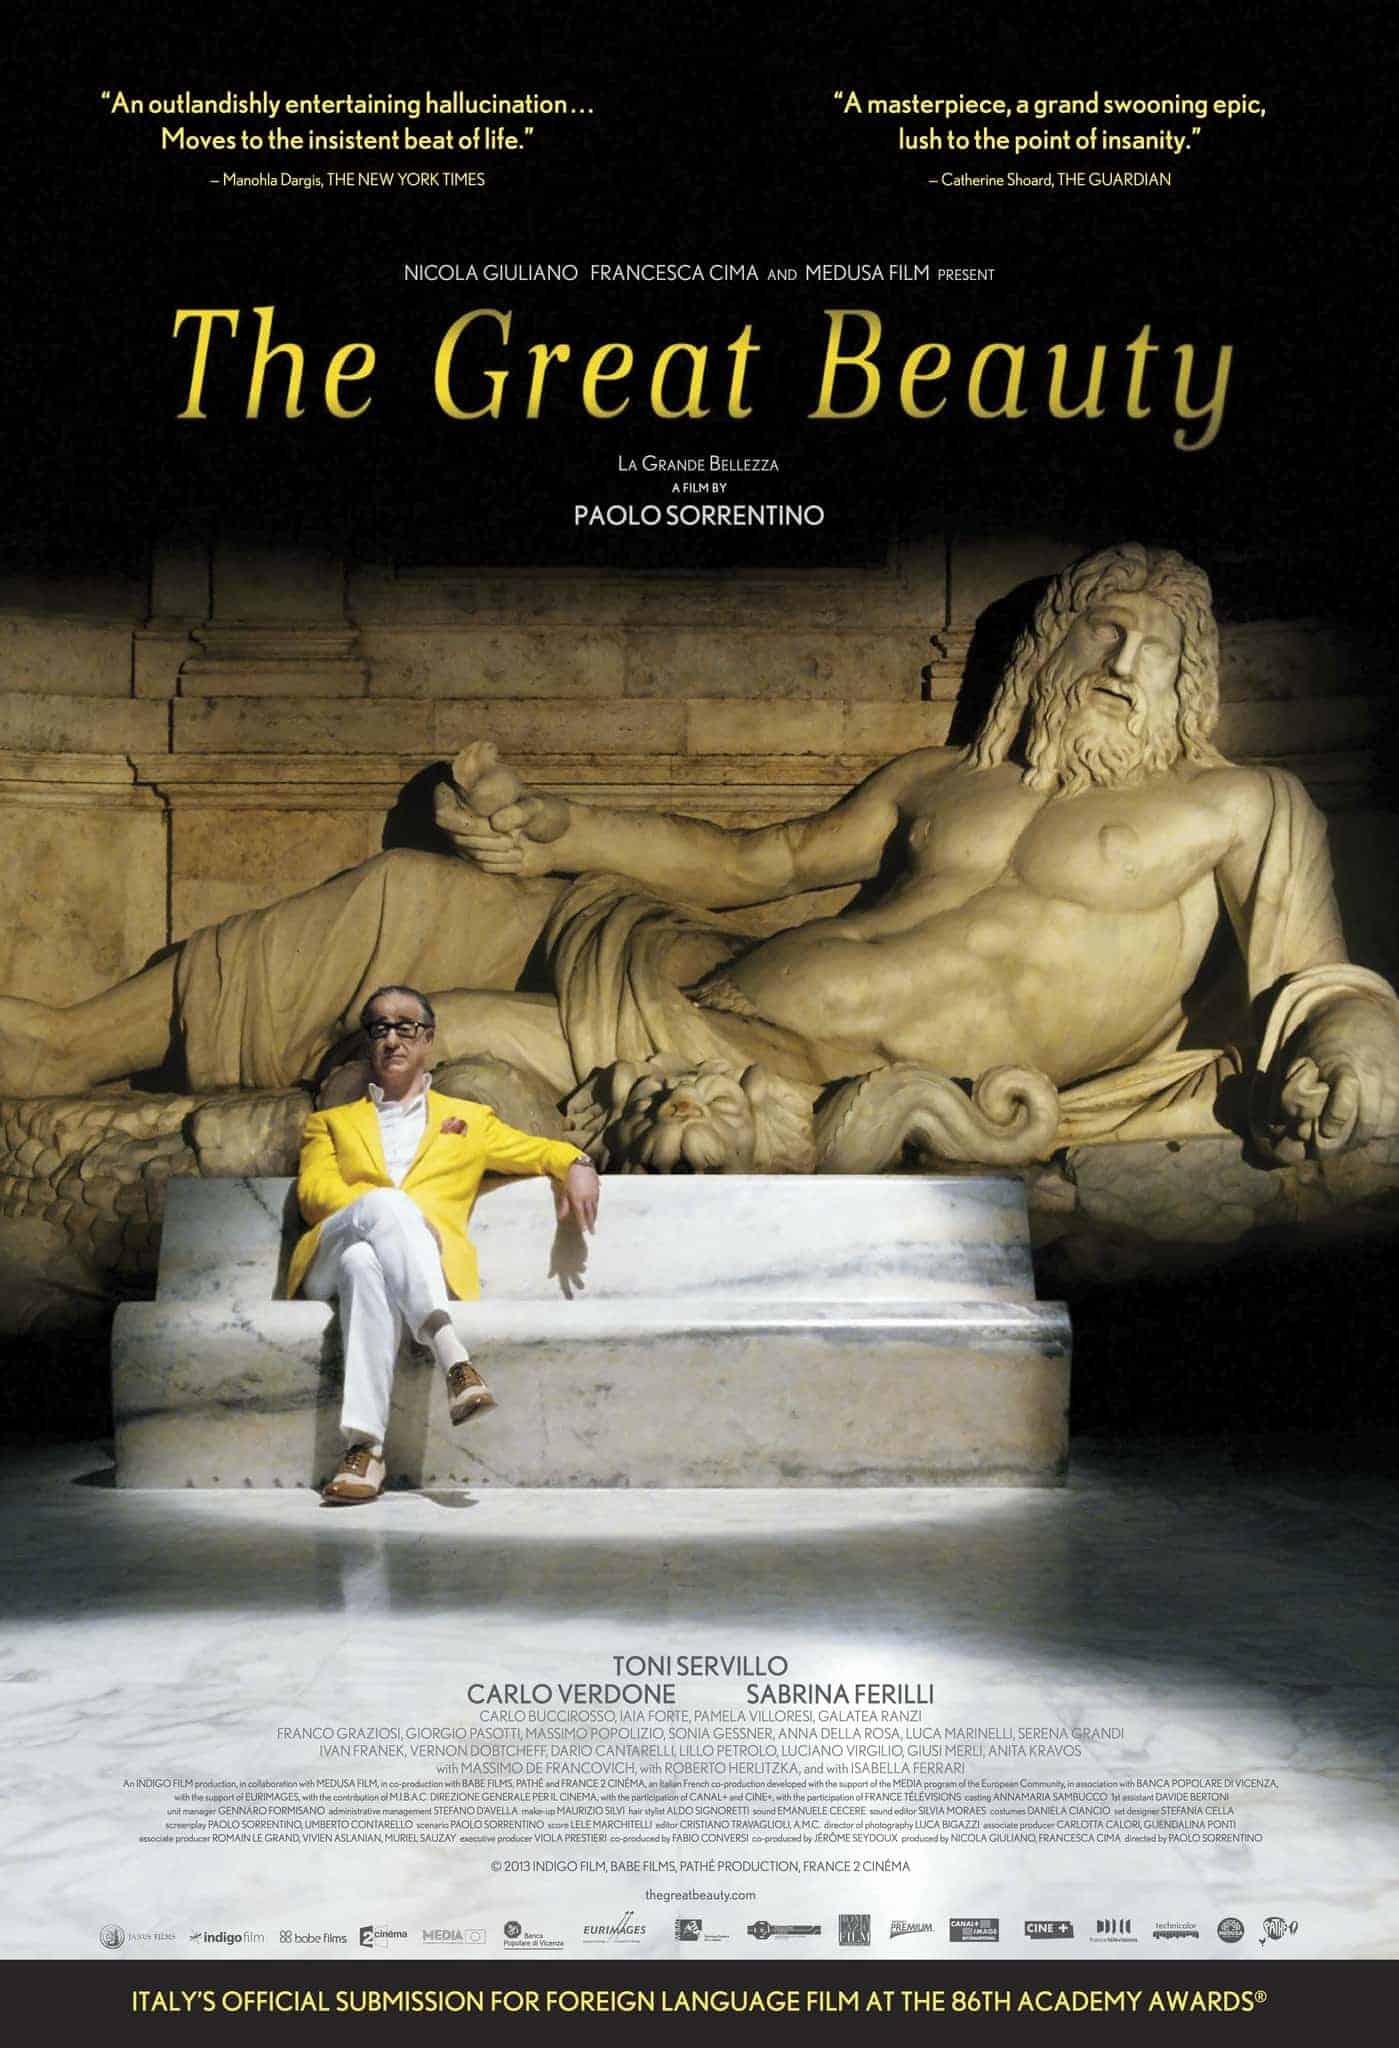 The Great Beauty (2013) Best Movies About Rome to Watch and Re-Watch